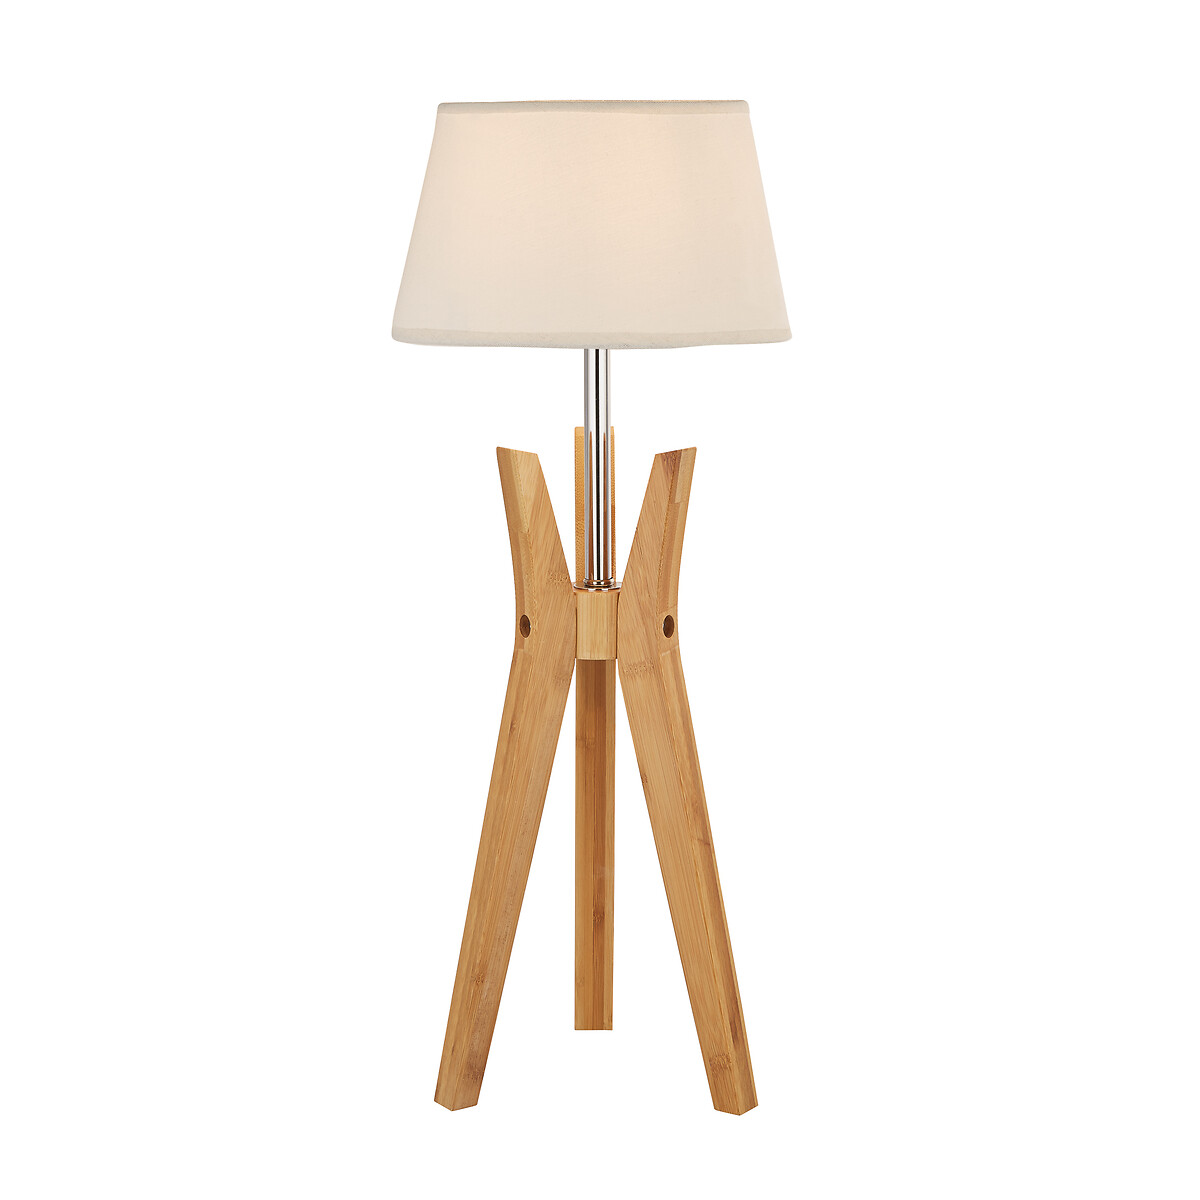 Tapered Natural Wood Tripod Table Lamp, White And Natural Wood Table Lamp Base